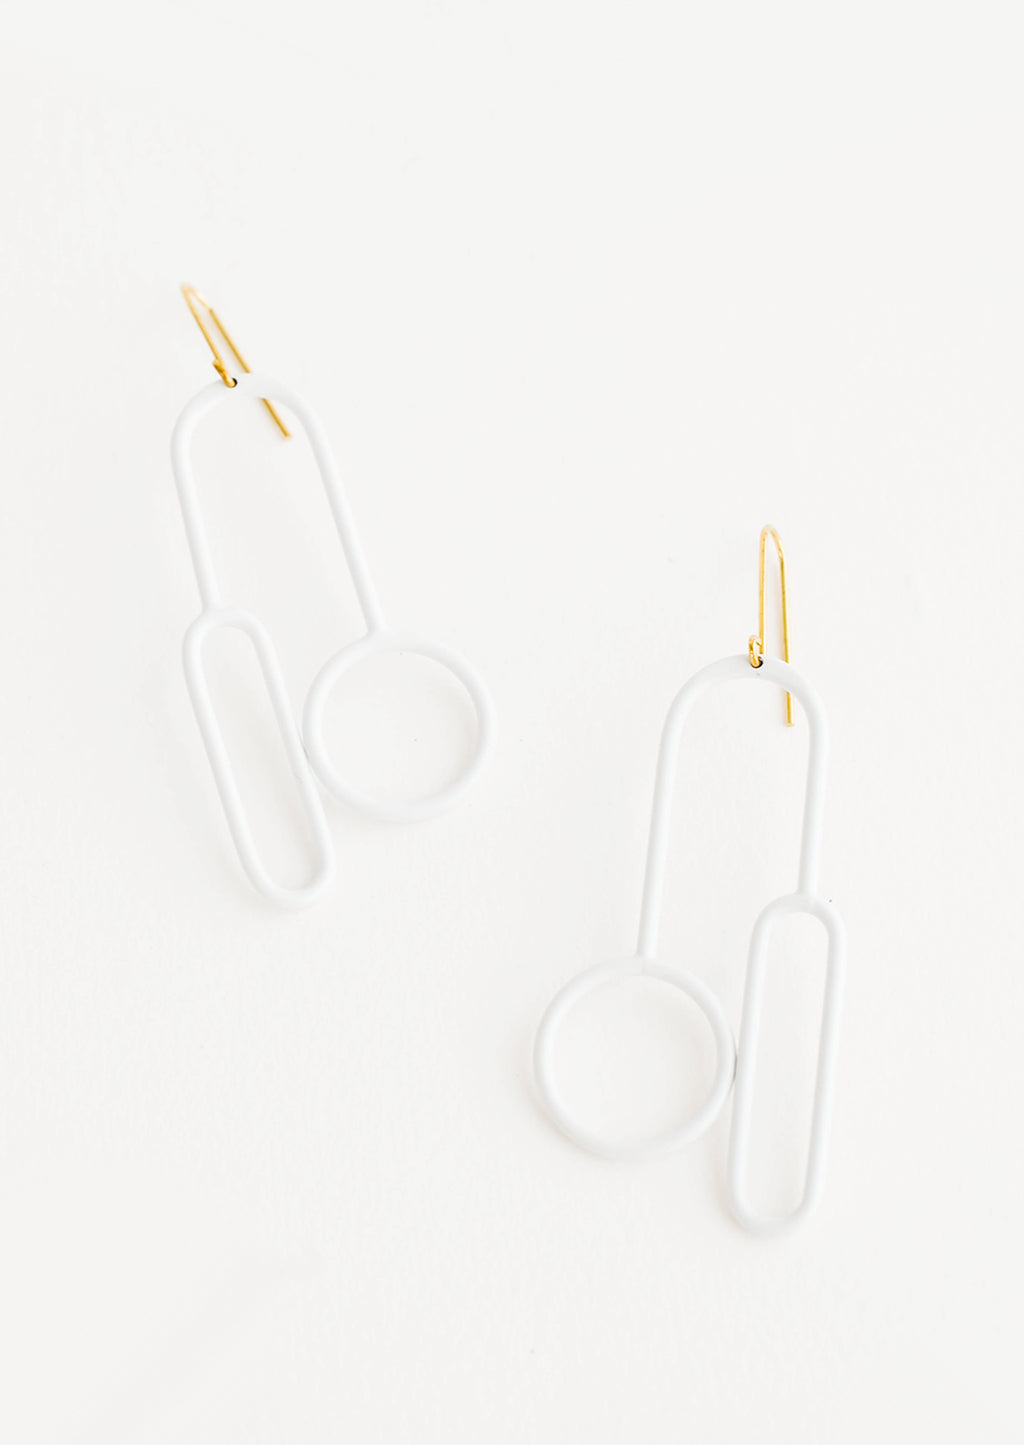 Blanco: Arced white earrings with one circle and one elongated oval at either end on a brass ear wire. 